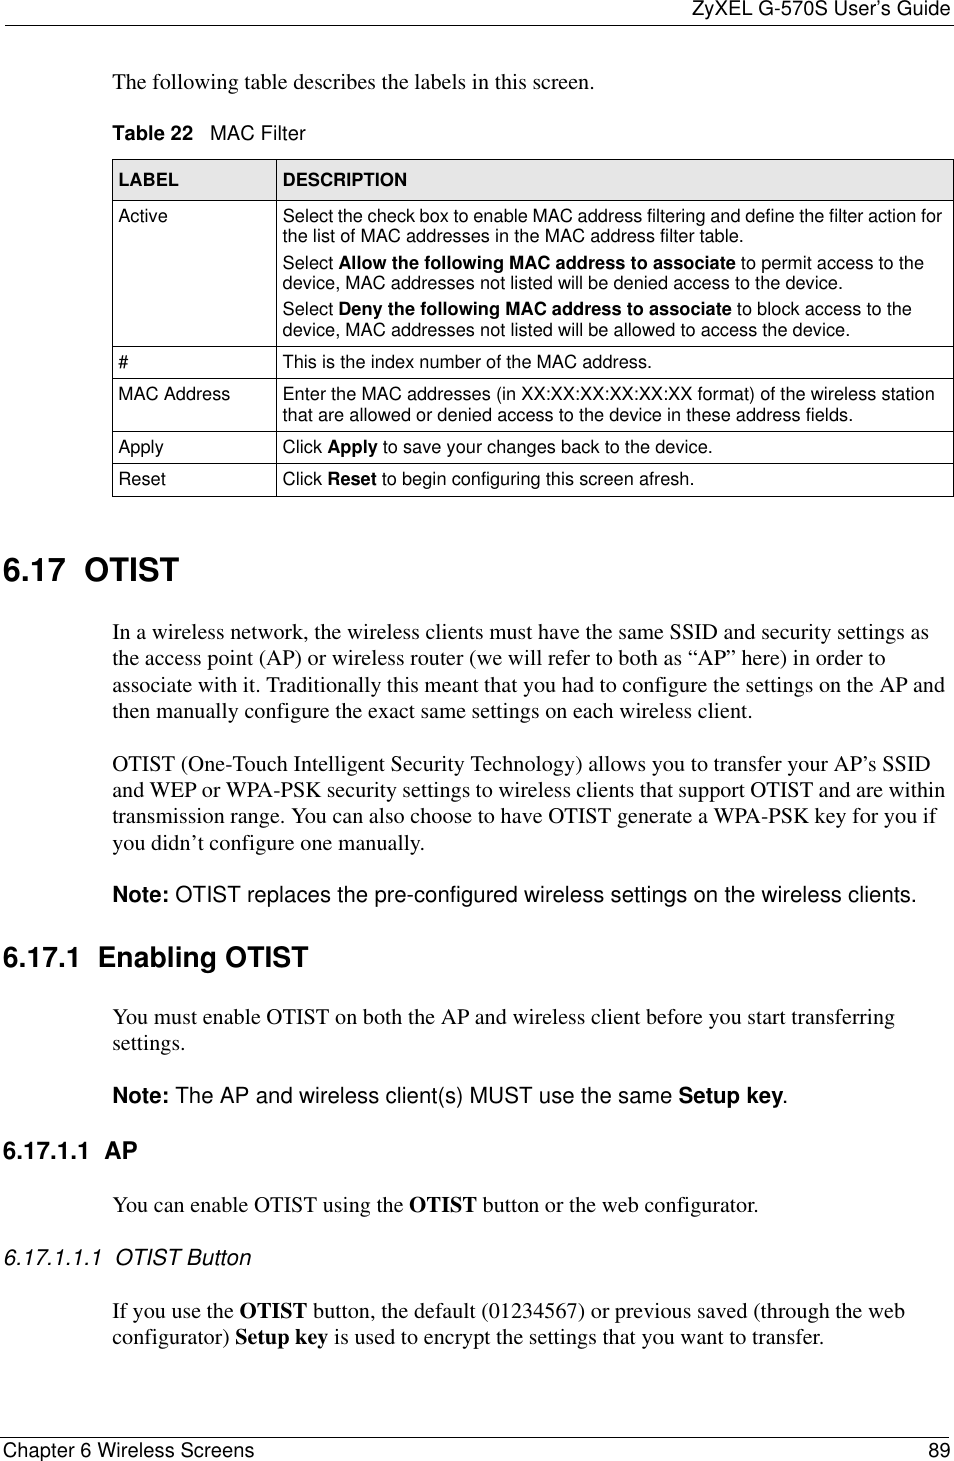 ZyXEL G-570S User’s GuideChapter 6 Wireless Screens 89The following table describes the labels in this screen.6.17  OTIST In a wireless network, the wireless clients must have the same SSID and security settings as the access point (AP) or wireless router (we will refer to both as “AP” here) in order to associate with it. Traditionally this meant that you had to configure the settings on the AP and then manually configure the exact same settings on each wireless client.OTIST (One-Touch Intelligent Security Technology) allows you to transfer your AP’s SSID and WEP or WPA-PSK security settings to wireless clients that support OTIST and are within transmission range. You can also choose to have OTIST generate a WPA-PSK key for you if you didn’t configure one manually.Note: OTIST replaces the pre-configured wireless settings on the wireless clients.6.17.1  Enabling OTISTYou must enable OTIST on both the AP and wireless client before you start transferring settings.Note: The AP and wireless client(s) MUST use the same Setup key.6.17.1.1  APYou can enable OTIST using the OTIST button or the web configurator. 6.17.1.1.1  OTIST ButtonIf you use the OTIST button, the default (01234567) or previous saved (through the web configurator) Setup key is used to encrypt the settings that you want to transfer. Table 22   MAC FilterLABEL DESCRIPTIONActive Select the check box to enable MAC address filtering and define the filter action for the list of MAC addresses in the MAC address filter table. Select Allow the following MAC address to associate to permit access to the device, MAC addresses not listed will be denied access to the device.Select Deny the following MAC address to associate to block access to the device, MAC addresses not listed will be allowed to access the device.# This is the index number of the MAC address.MAC Address Enter the MAC addresses (in XX:XX:XX:XX:XX:XX format) of the wireless station that are allowed or denied access to the device in these address fields.Apply Click Apply to save your changes back to the device.Reset Click Reset to begin configuring this screen afresh.